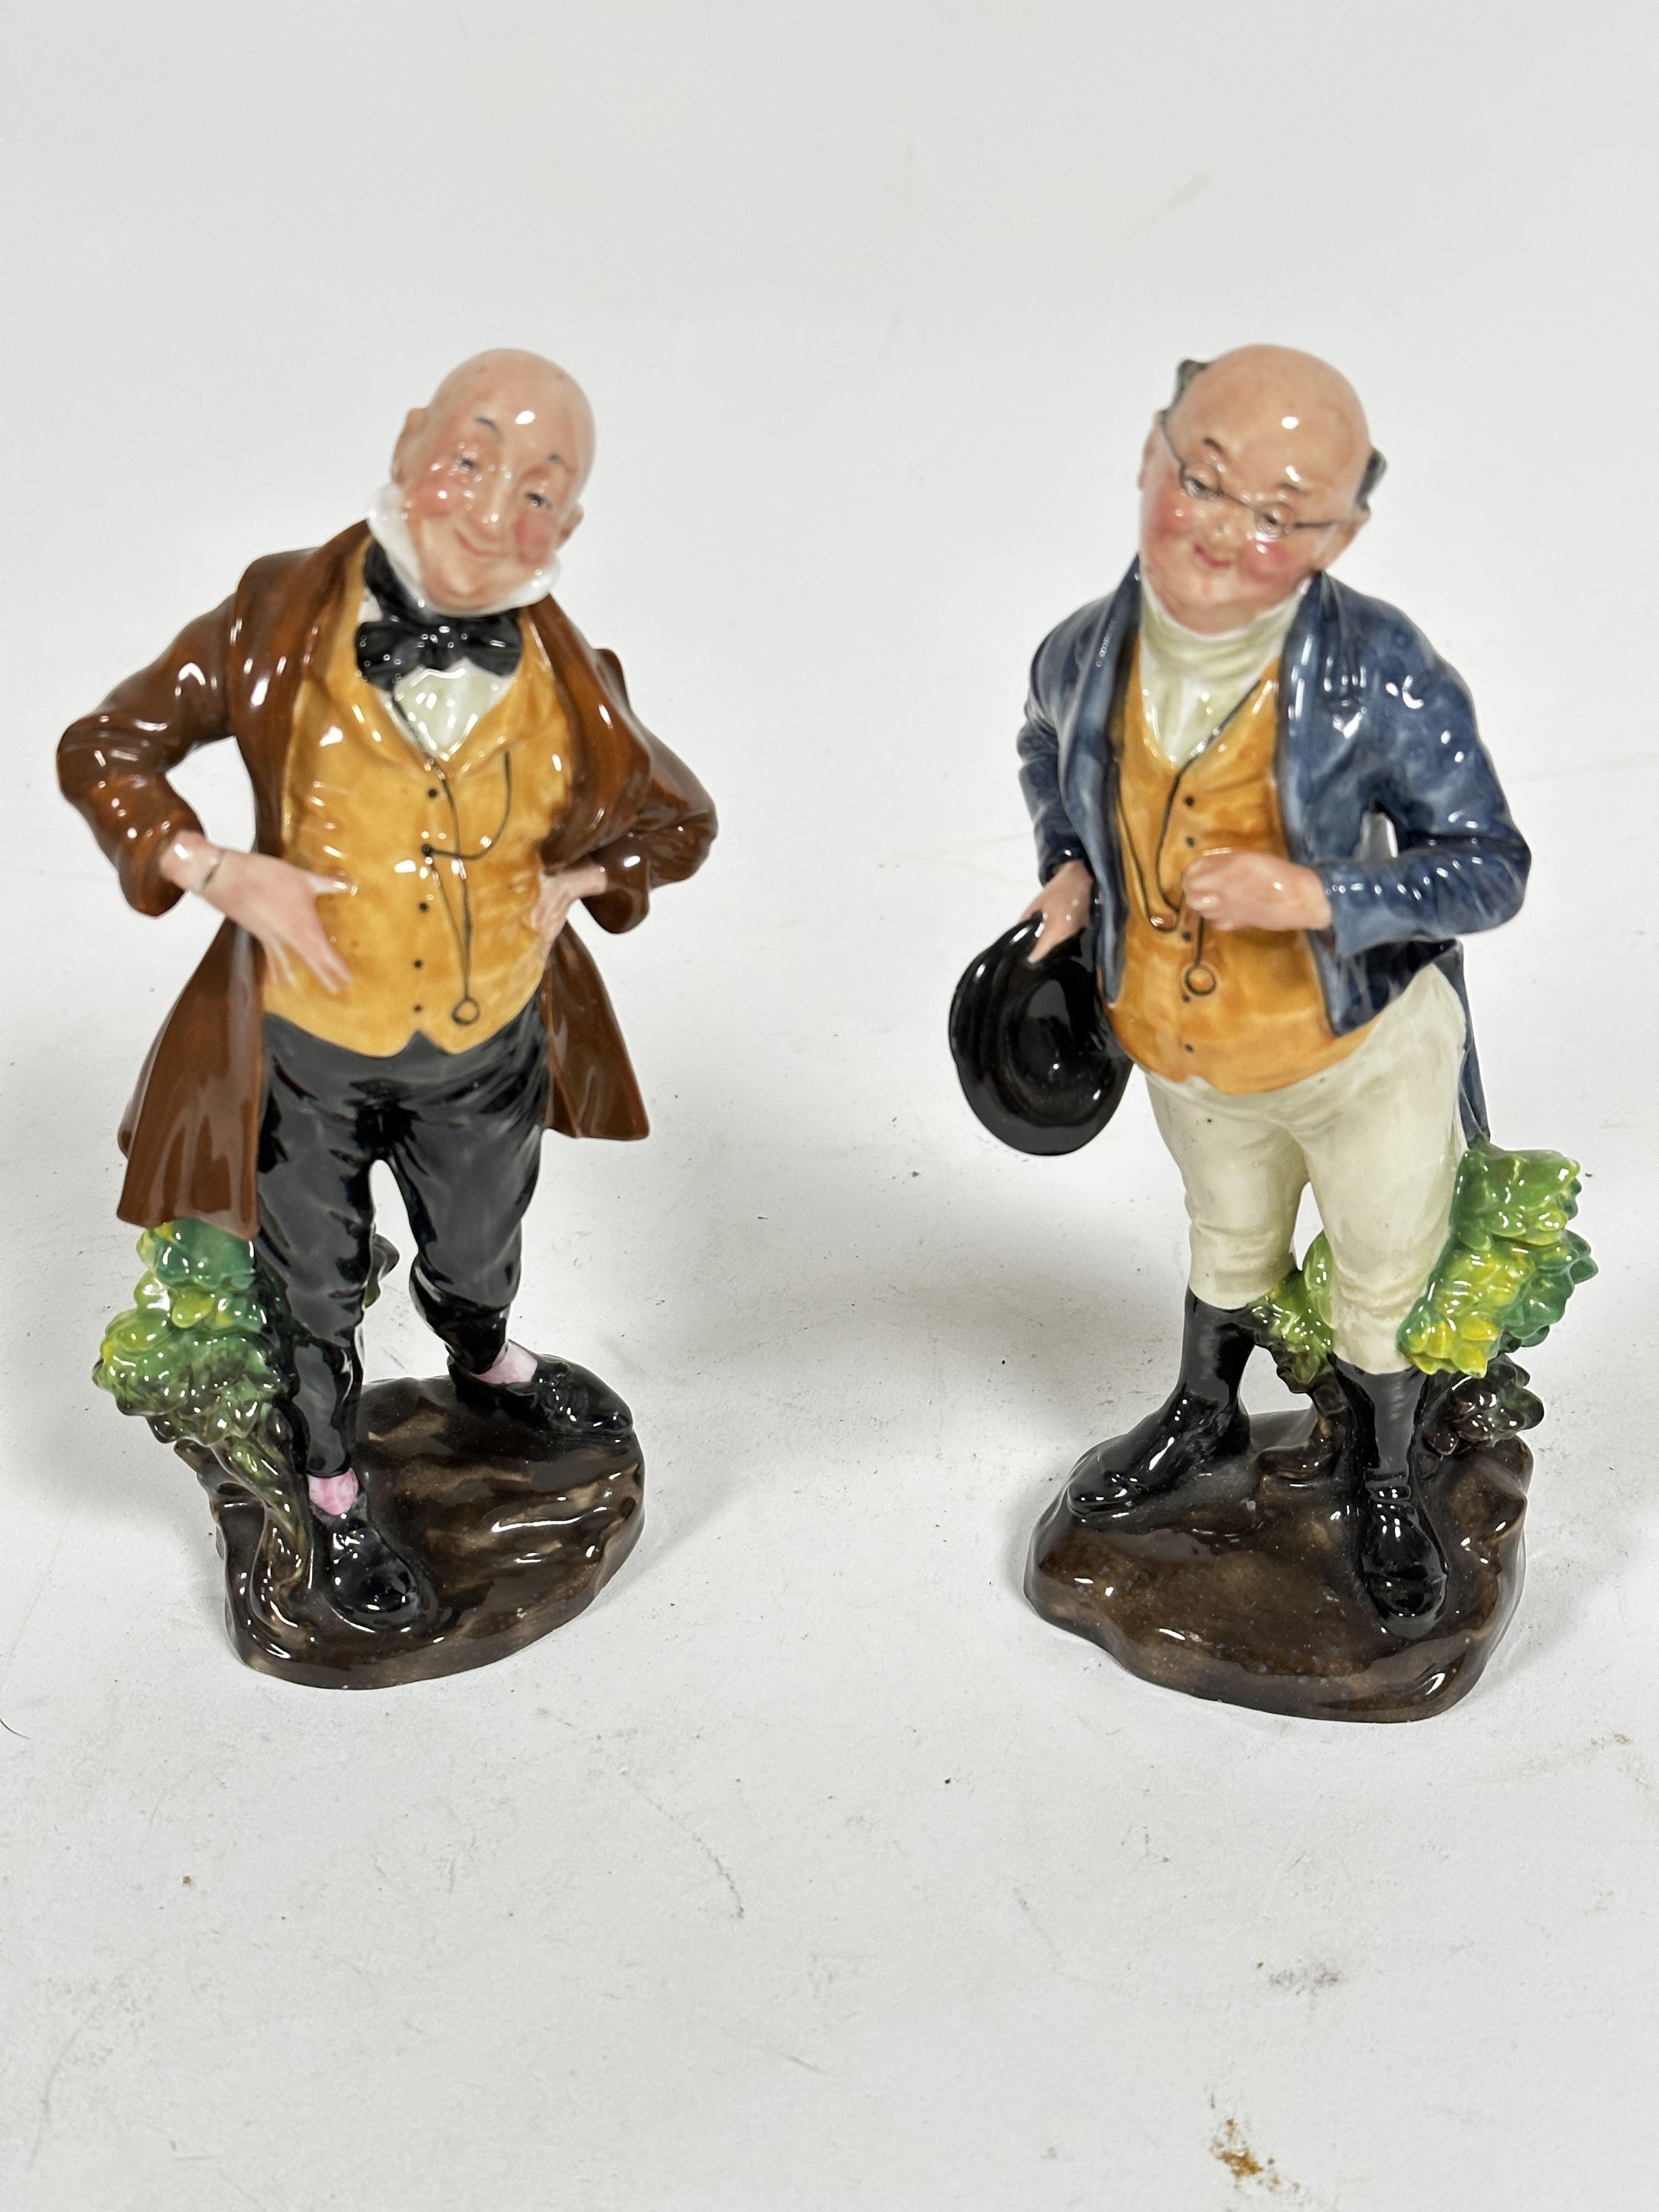 A Royal Doulton figure, Mr Pickwick, decorated with polychrome enamels, HN556, a Royal Doulton